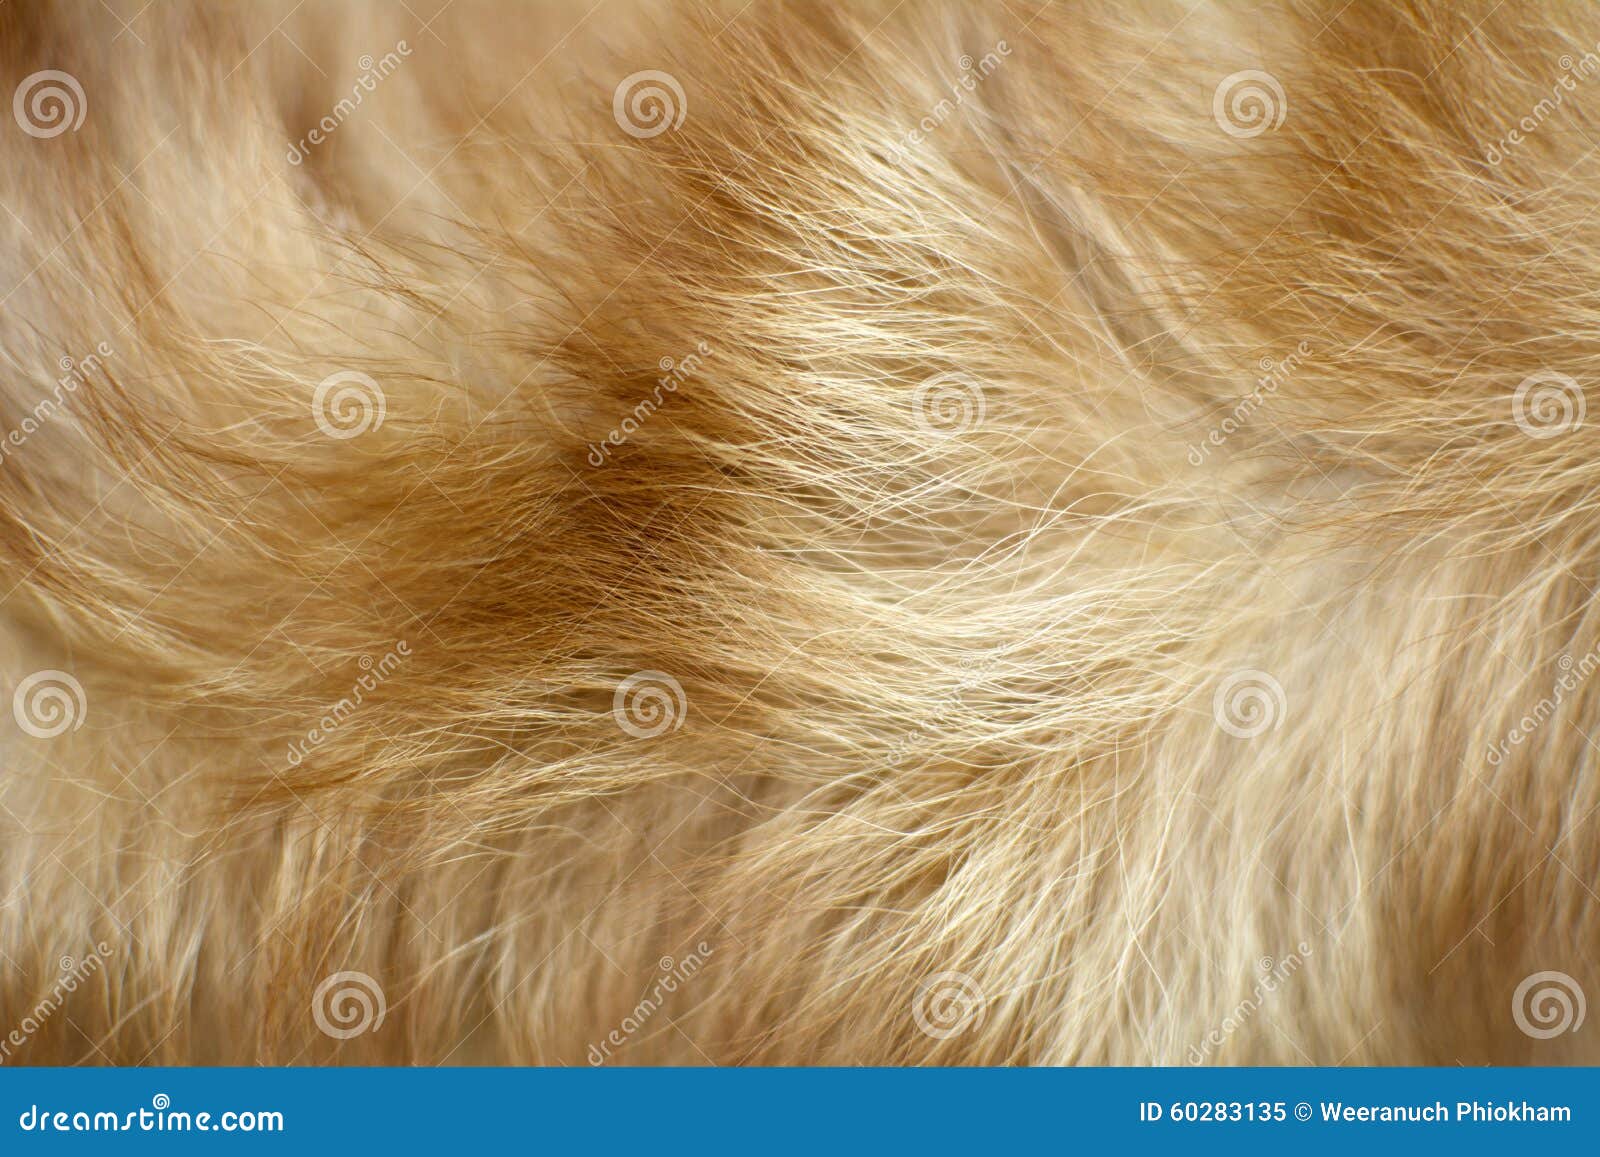 Brown Fur Stock Photos, Images and Backgrounds for Free Download